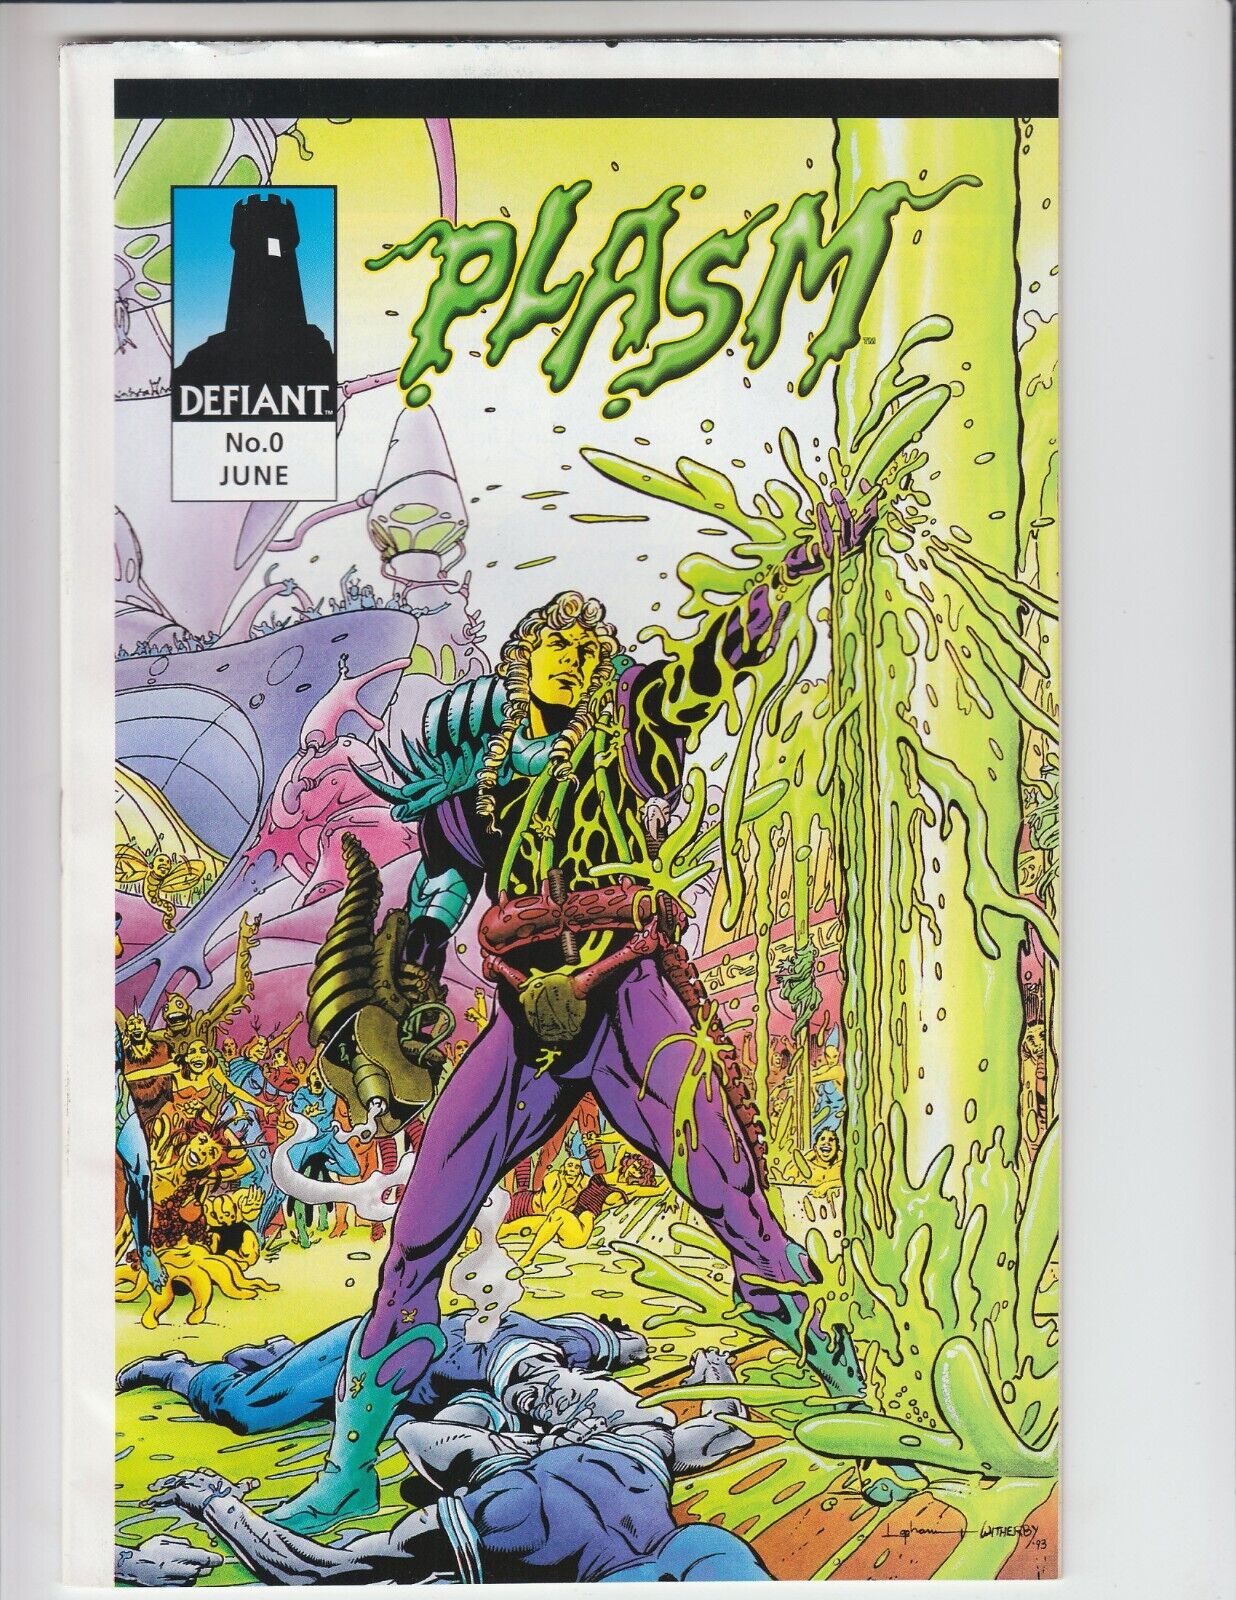 Plasm #0A VF; Defiant | single staple edition - we combine shipping